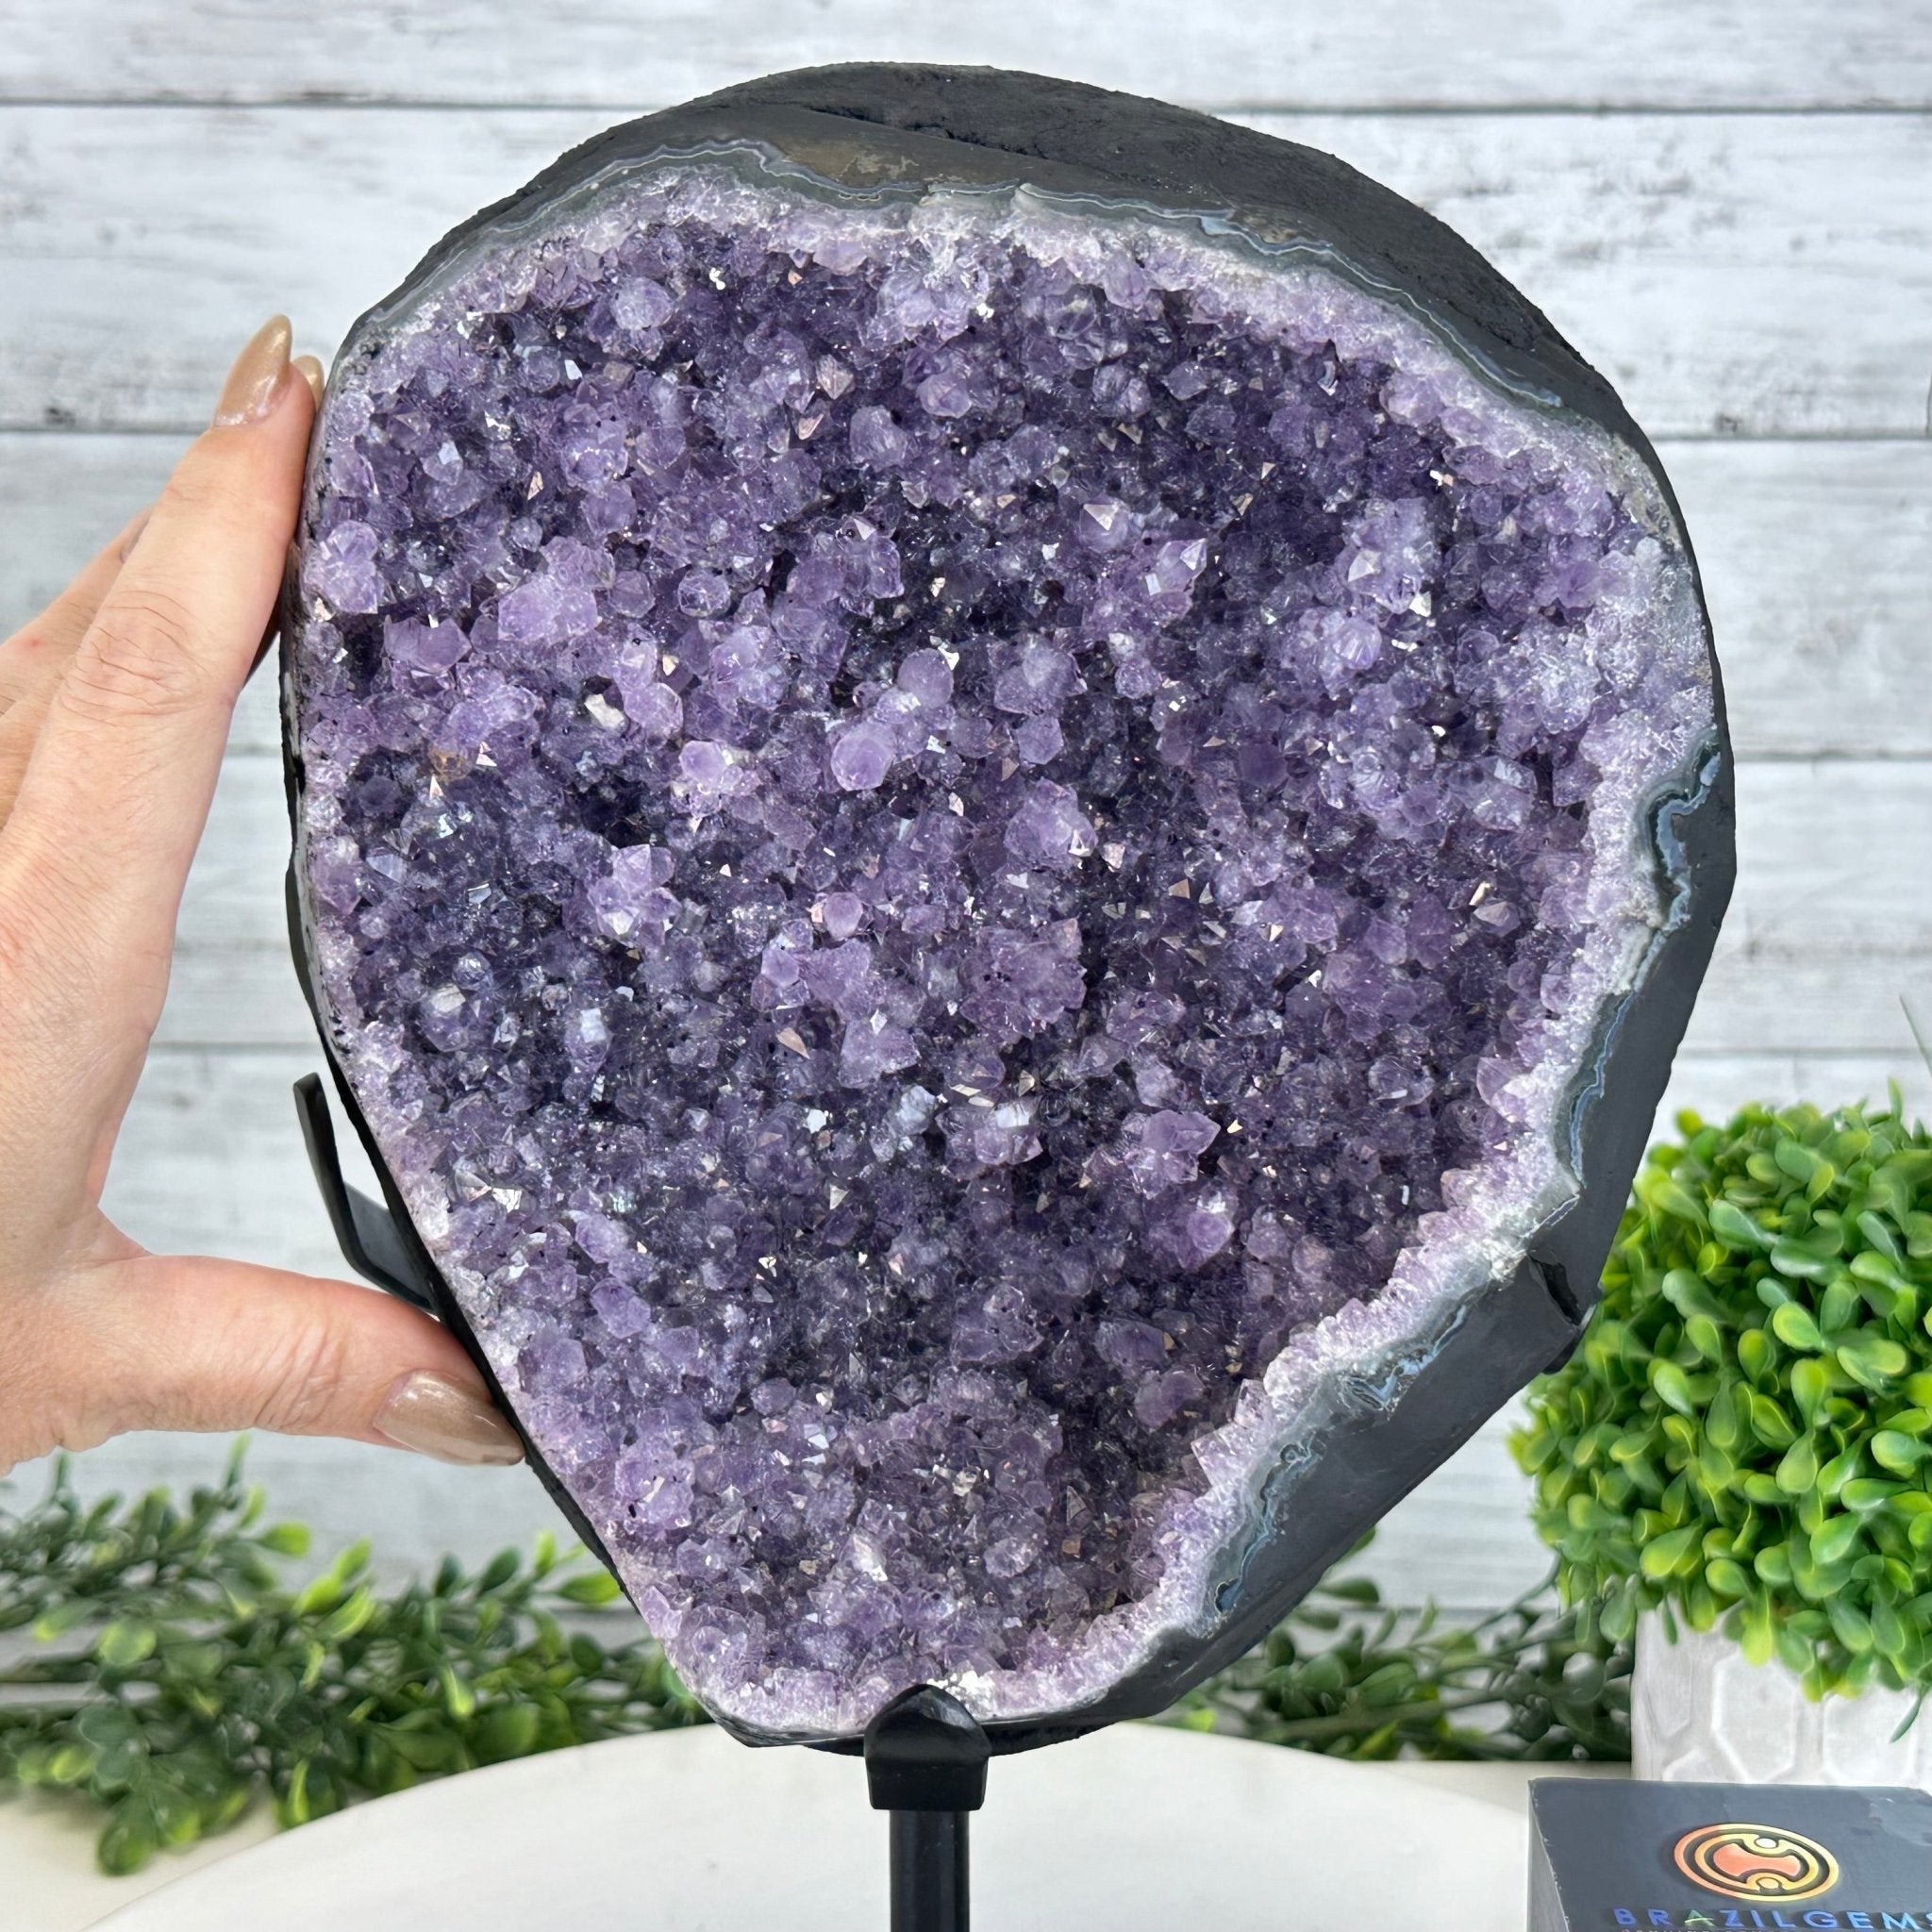 Quality Amethyst Cluster on a Metal Base, 16.9 lbs & 12.5" Tall #5491 - 0058 - Brazil GemsBrazil GemsQuality Amethyst Cluster on a Metal Base, 16.9 lbs & 12.5" Tall #5491 - 0058Clusters on Fixed Bases5491 - 0058